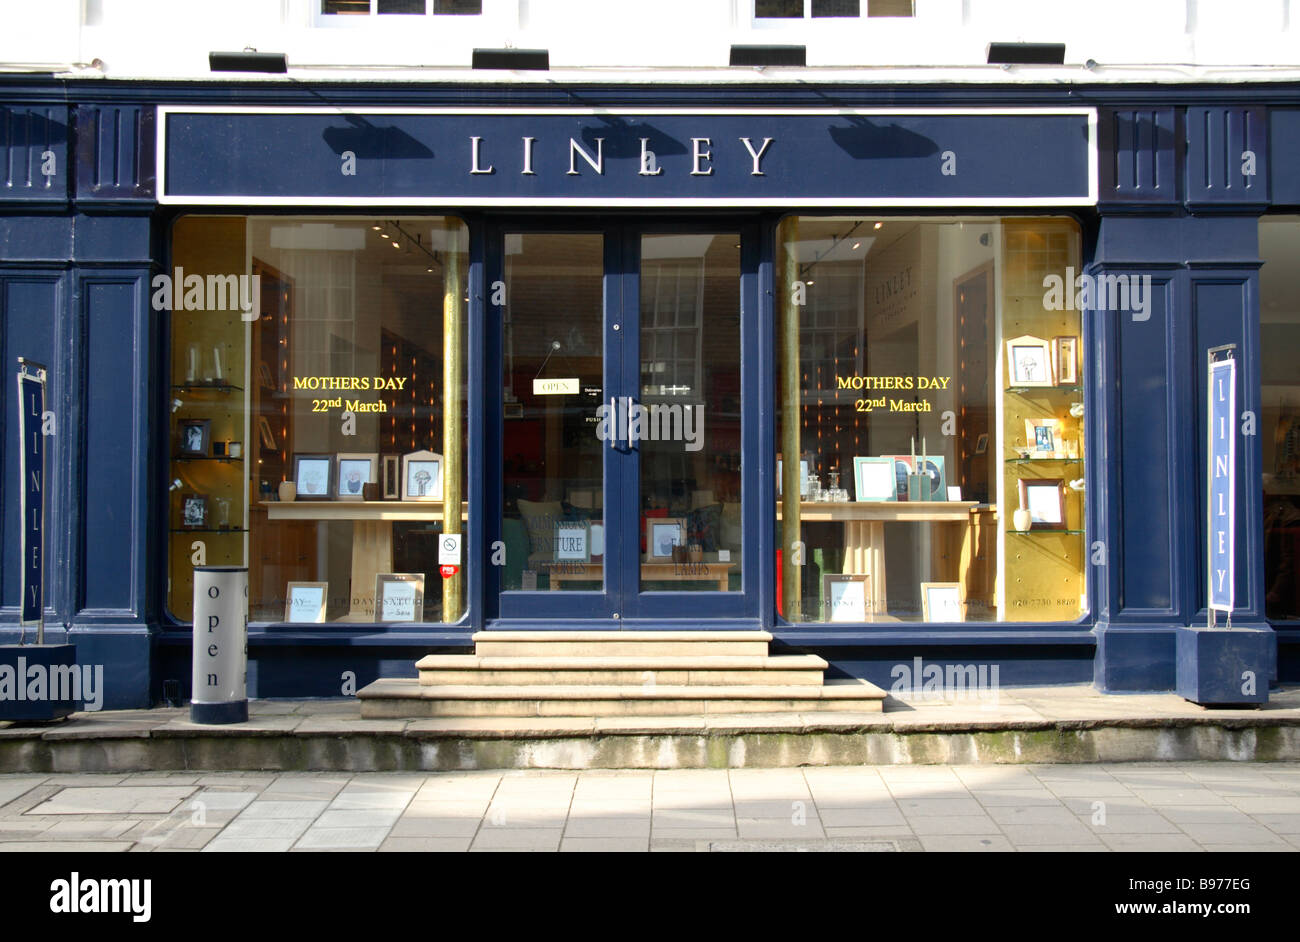 The shop front of the David Linley furniture store, Belgravia, London. March 2009 Stock Photo